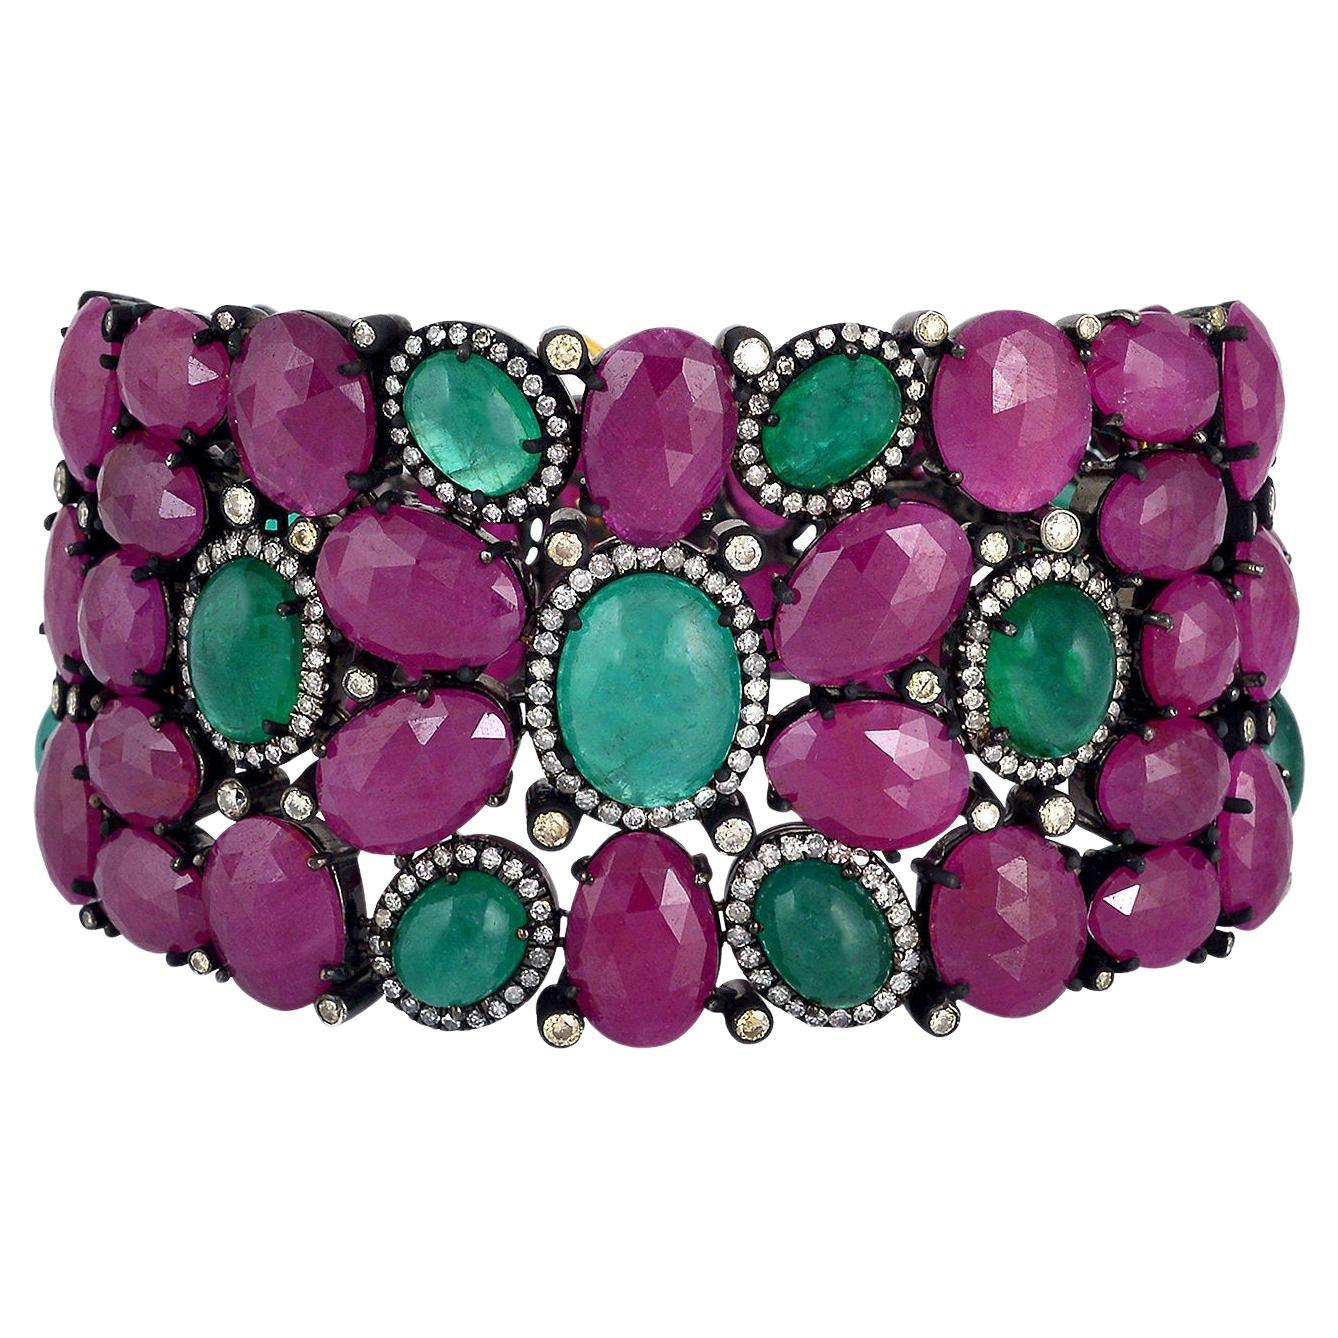 Baroque 139 Carats Natural Ruby Emerald & Diamond Bracelet 18k Gold & Silver For Sale